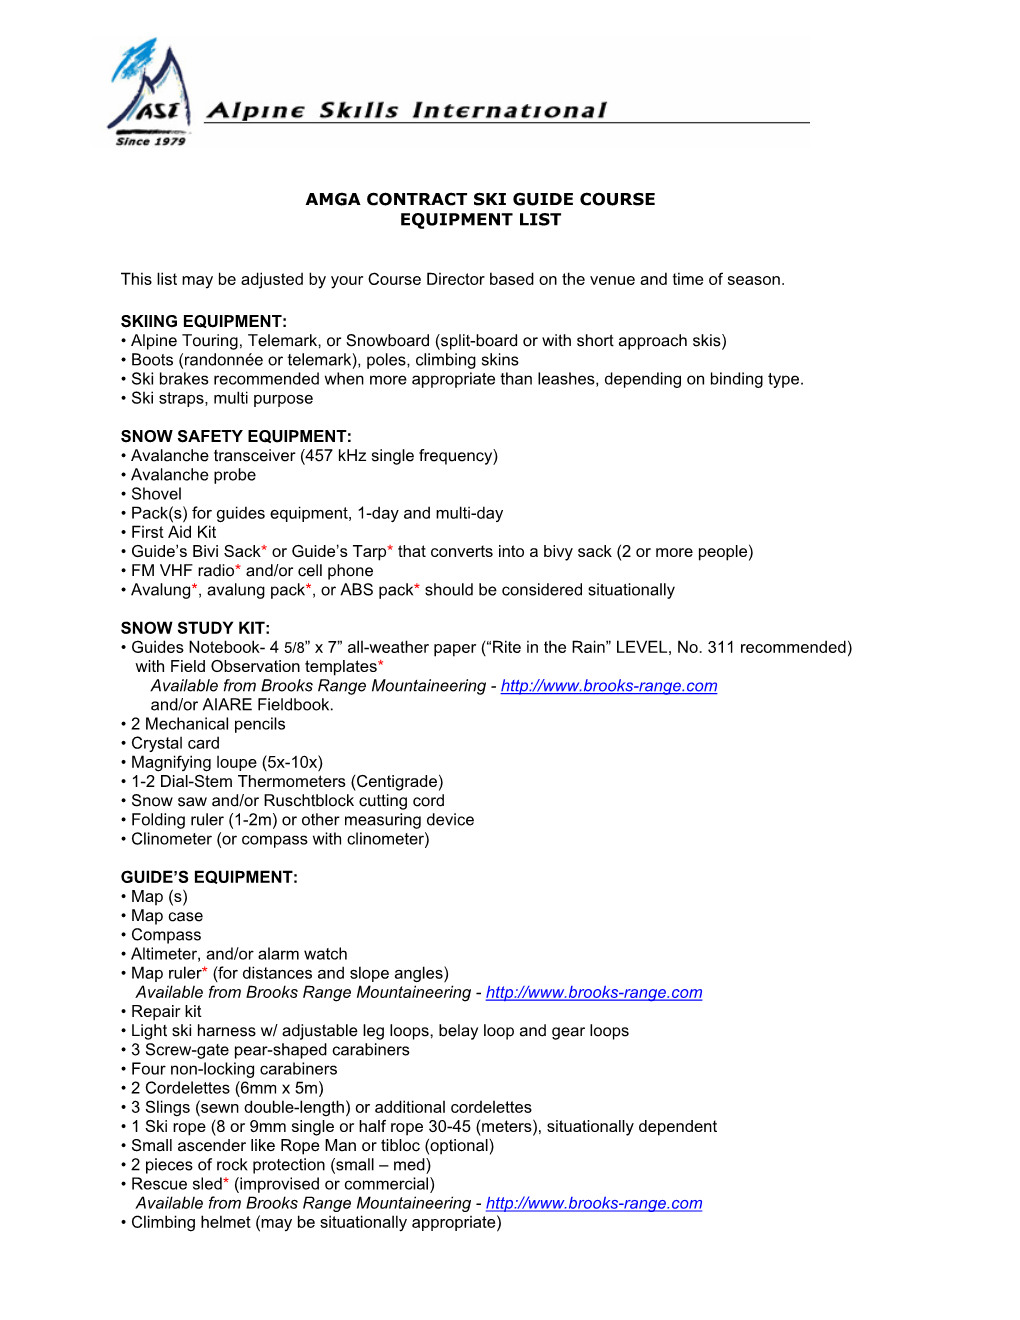 Amga Contract Ski Guide Course Equipment List